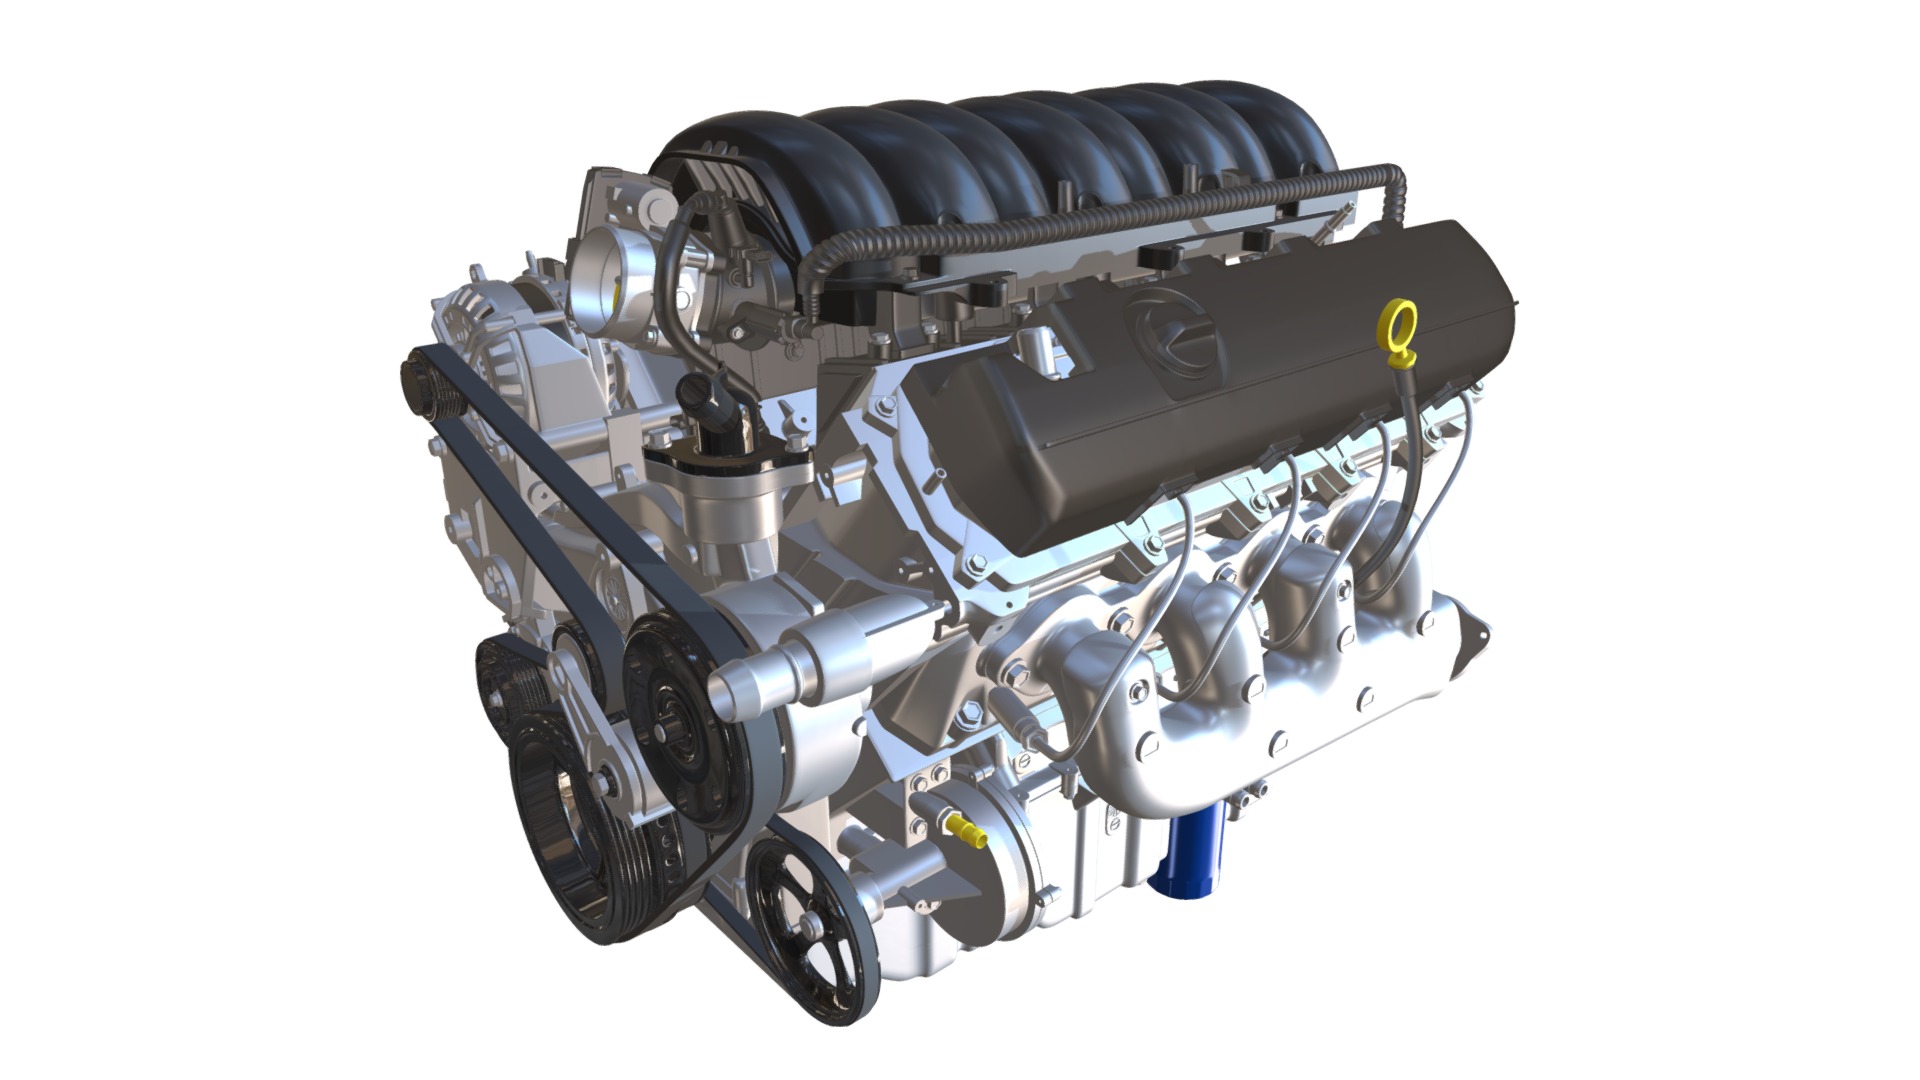 3D model Chevrolet Silverado V8 Engine - This is a 3D model of the Chevrolet Silverado V8 Engine. The 3D model is about a black and silver motor.